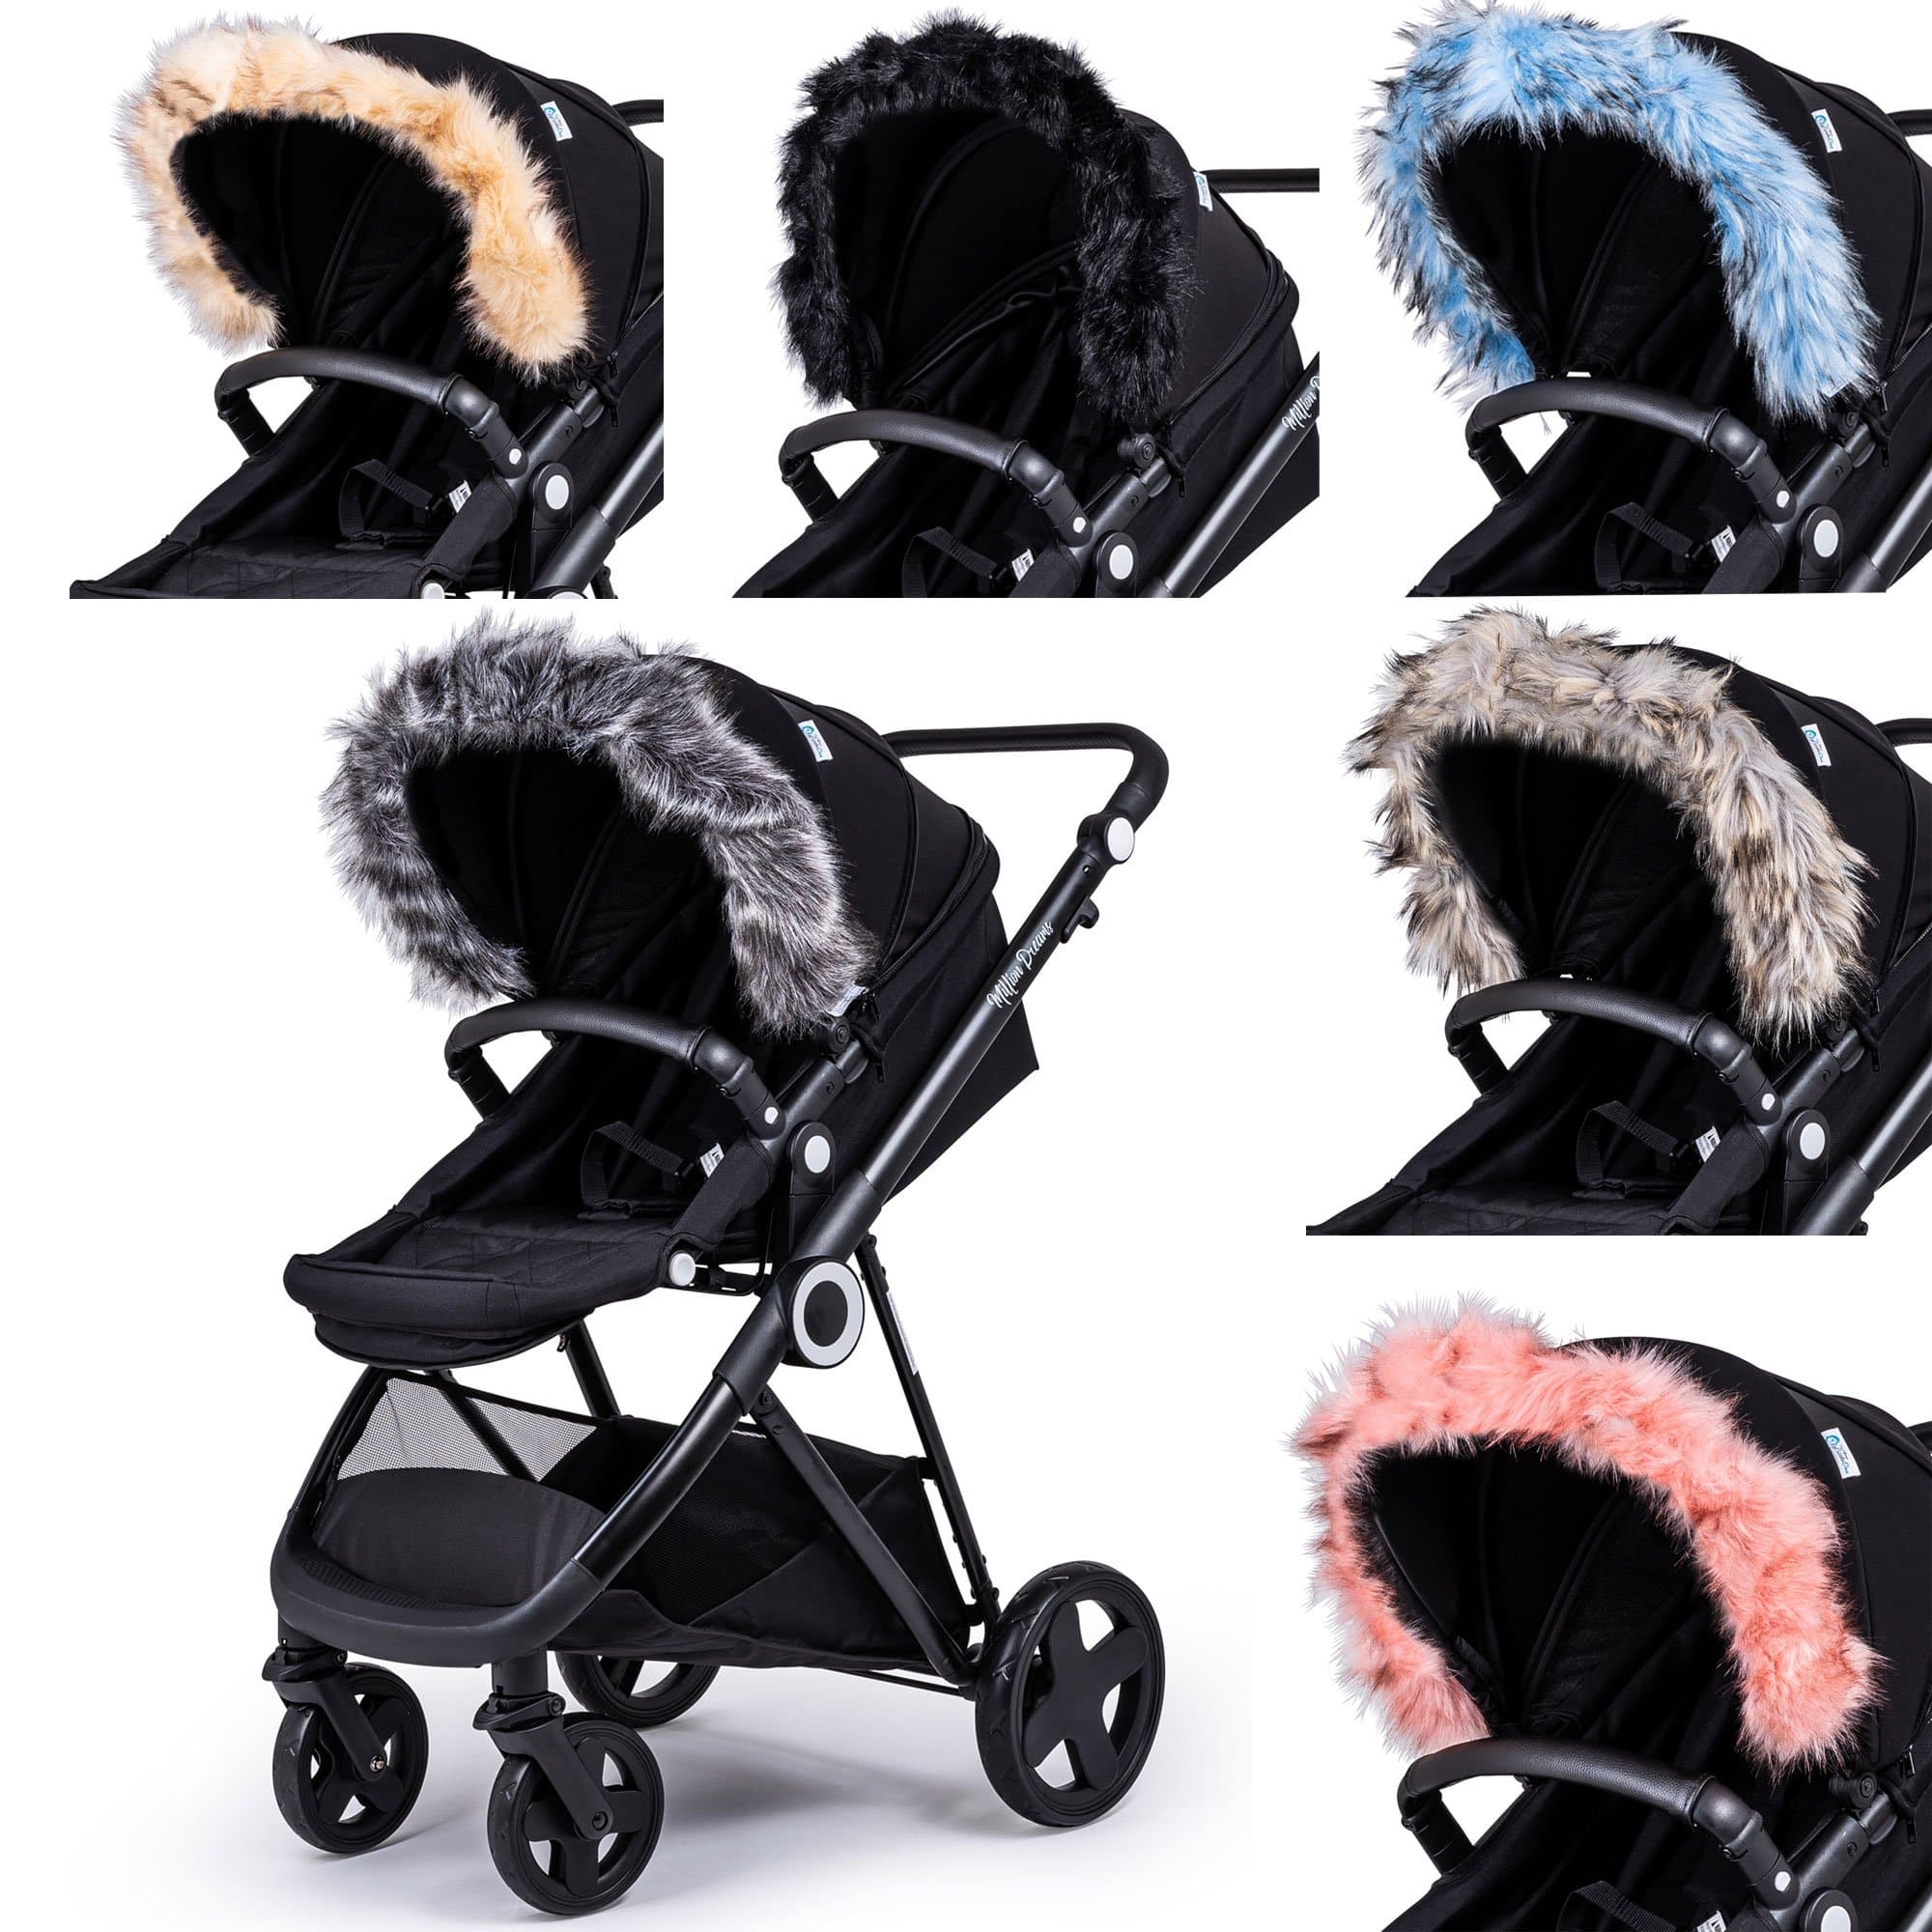 Pram Fur Hood Trim Attachment for Pushchair Compatible with Cybex - For Your Little One